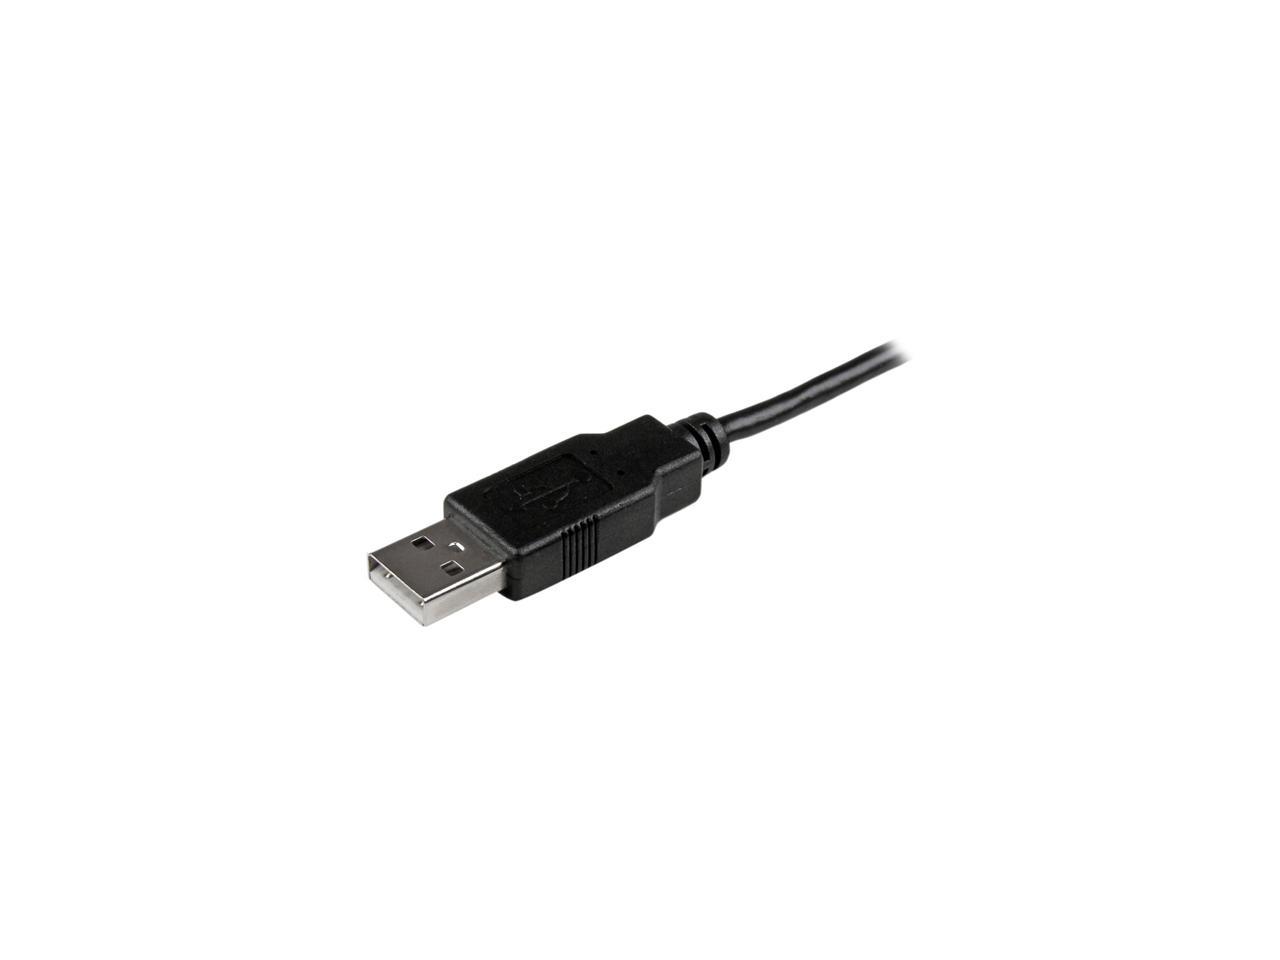 StarTech.com 3 ft Mobile Charge Sync USB to Slim Micro USB Cable for Smartphones and Tablets - A to Micro B